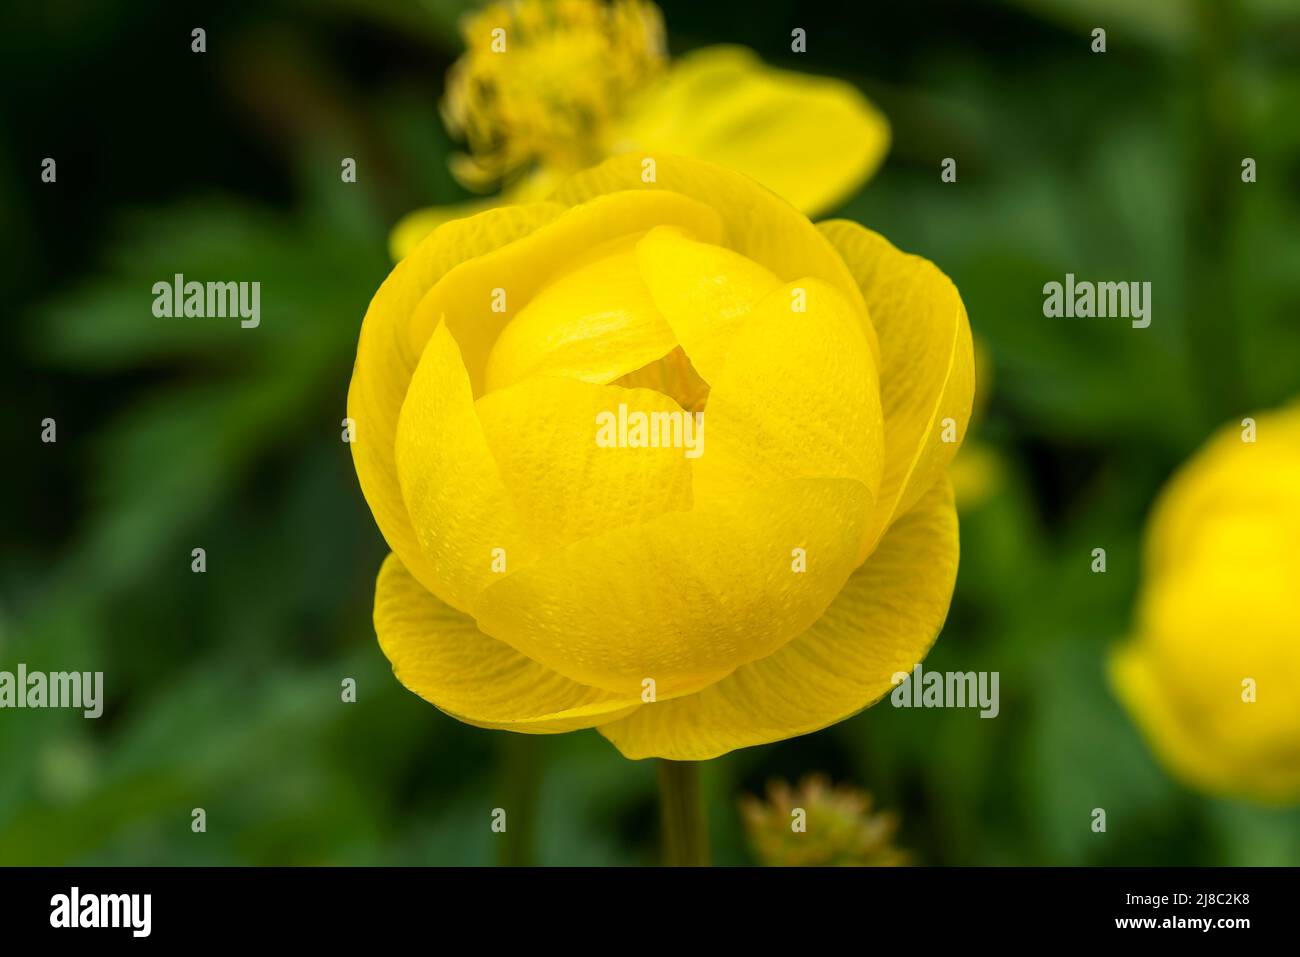 Trollius x cultorum 'T. Smith' a spring summer flowering plant with a yellow summertime flower commonly known as Globeflower, stock photo image Stock Photo